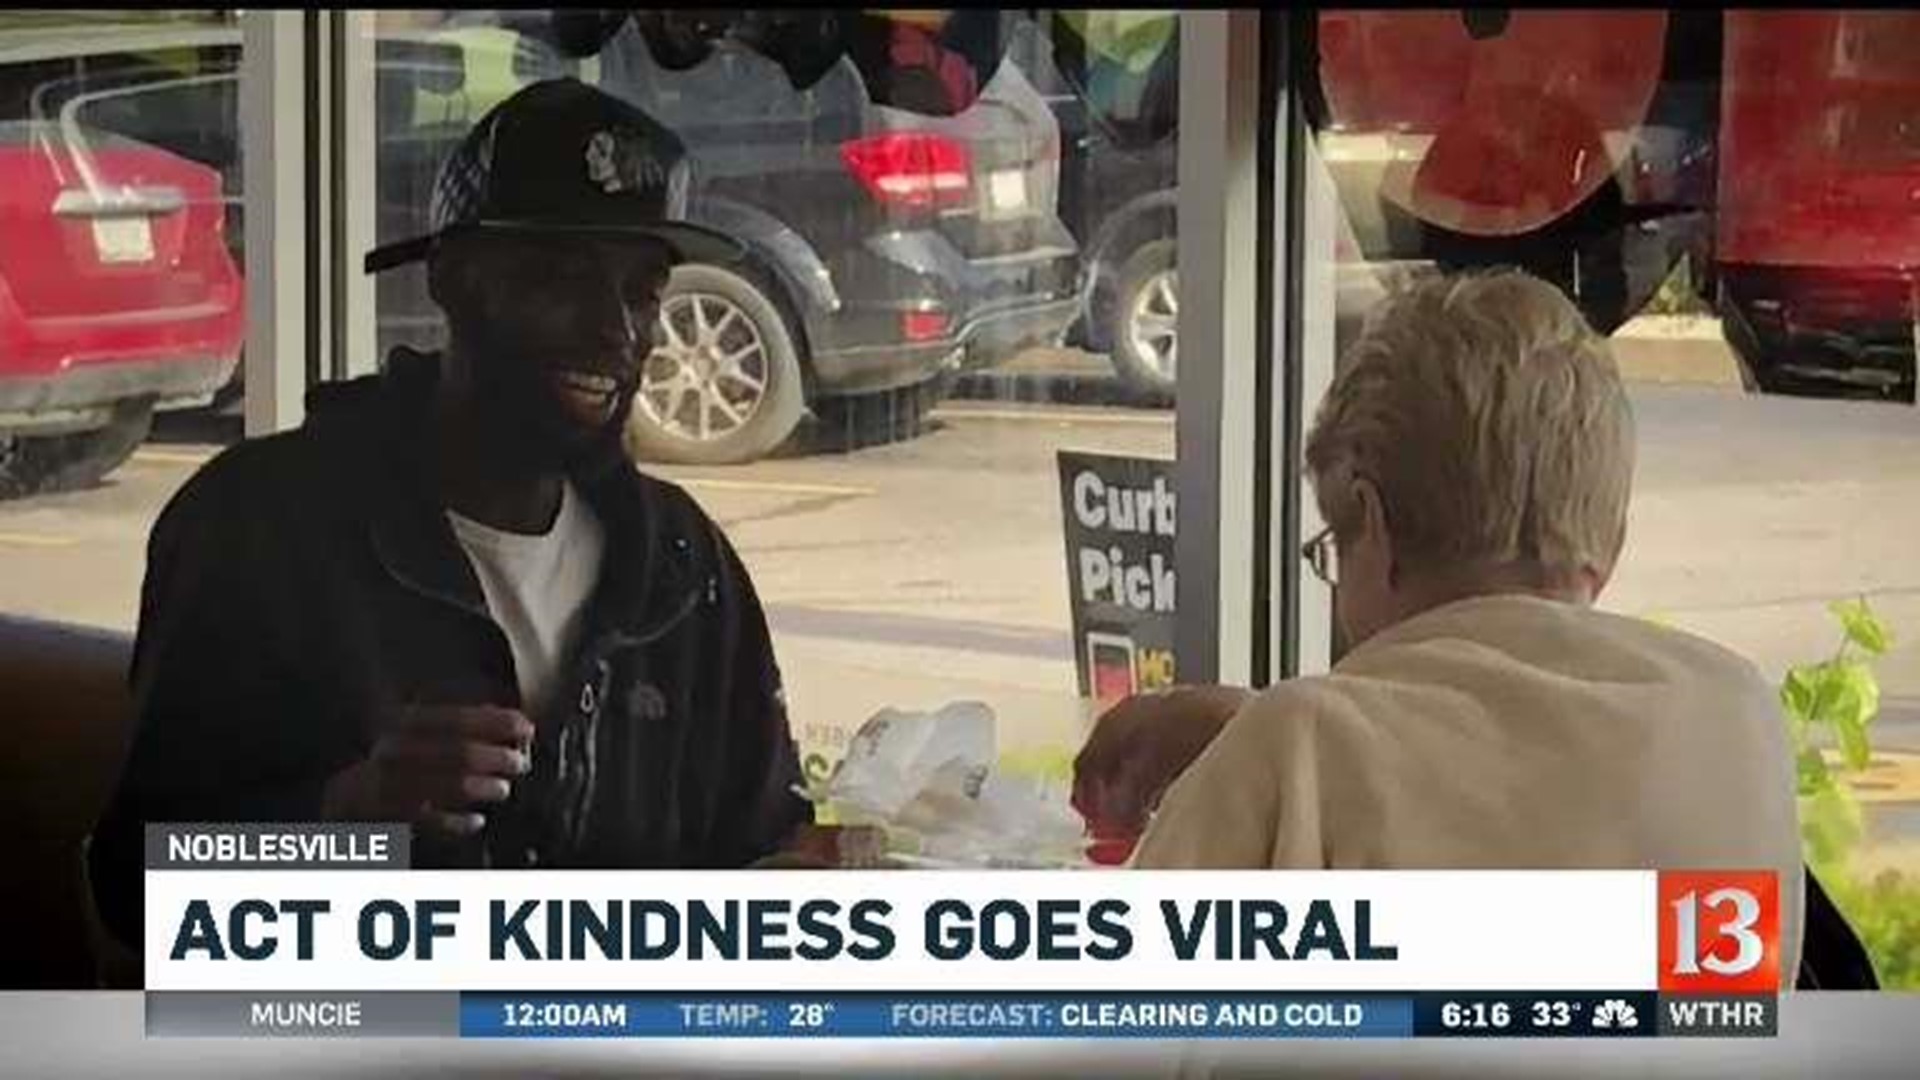 Act of kindness goes viral